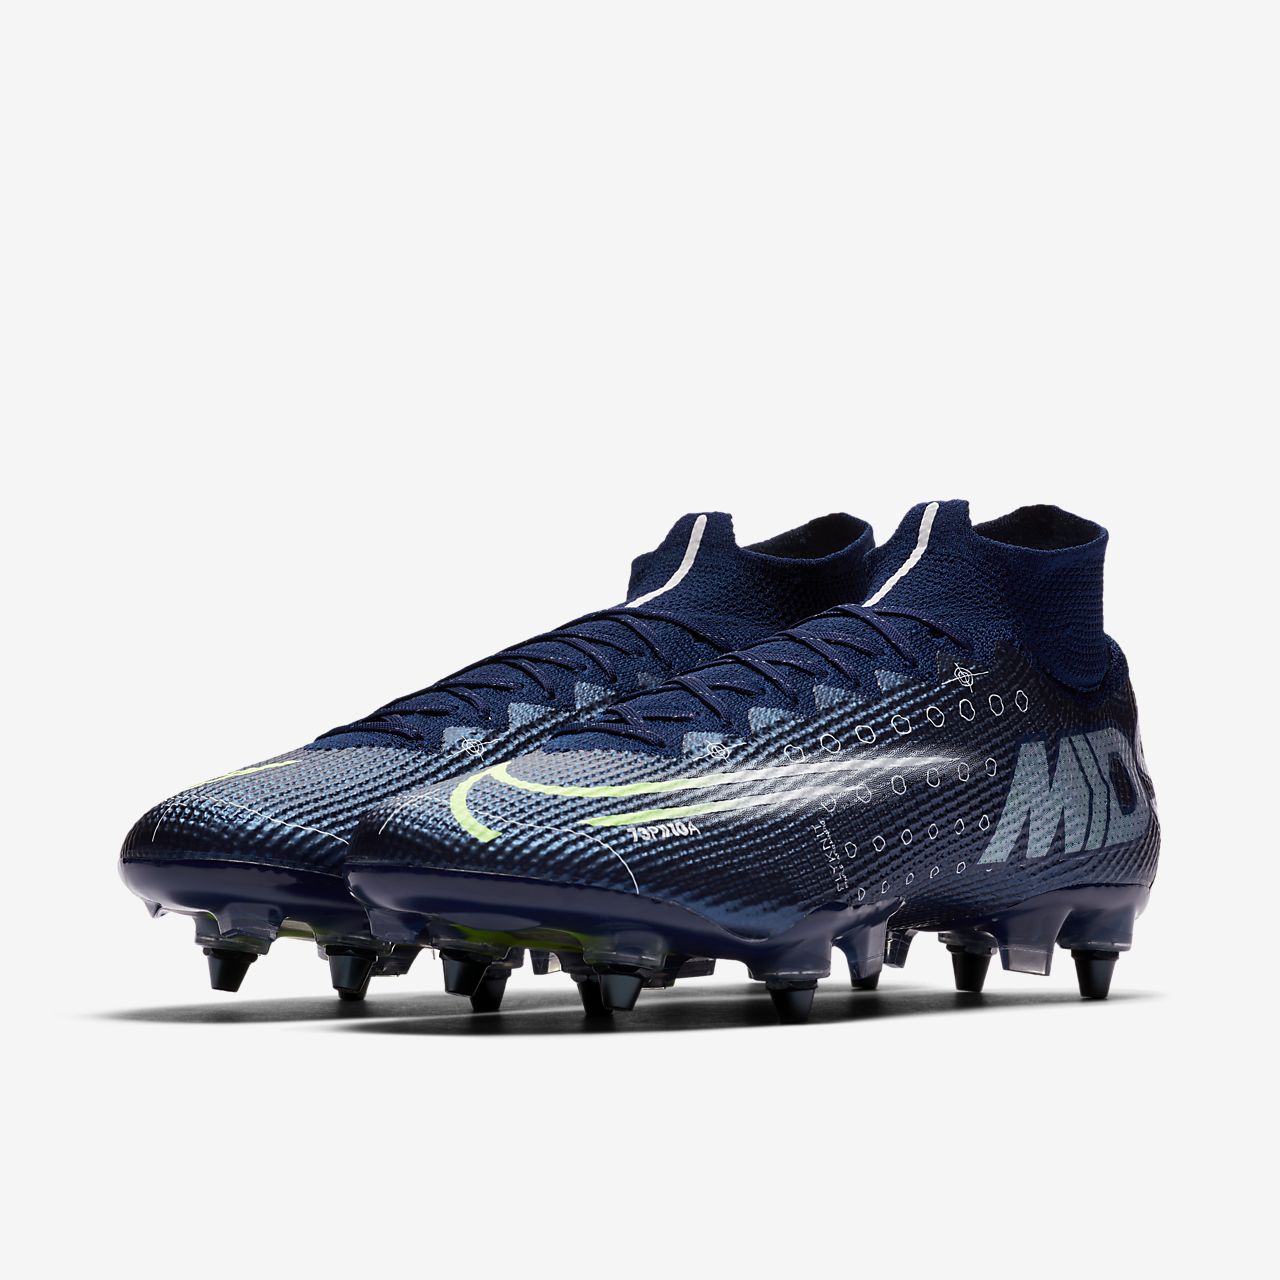 Nike Mercurial Superfly 6 Elite SG PRO Anti Clog Game Over